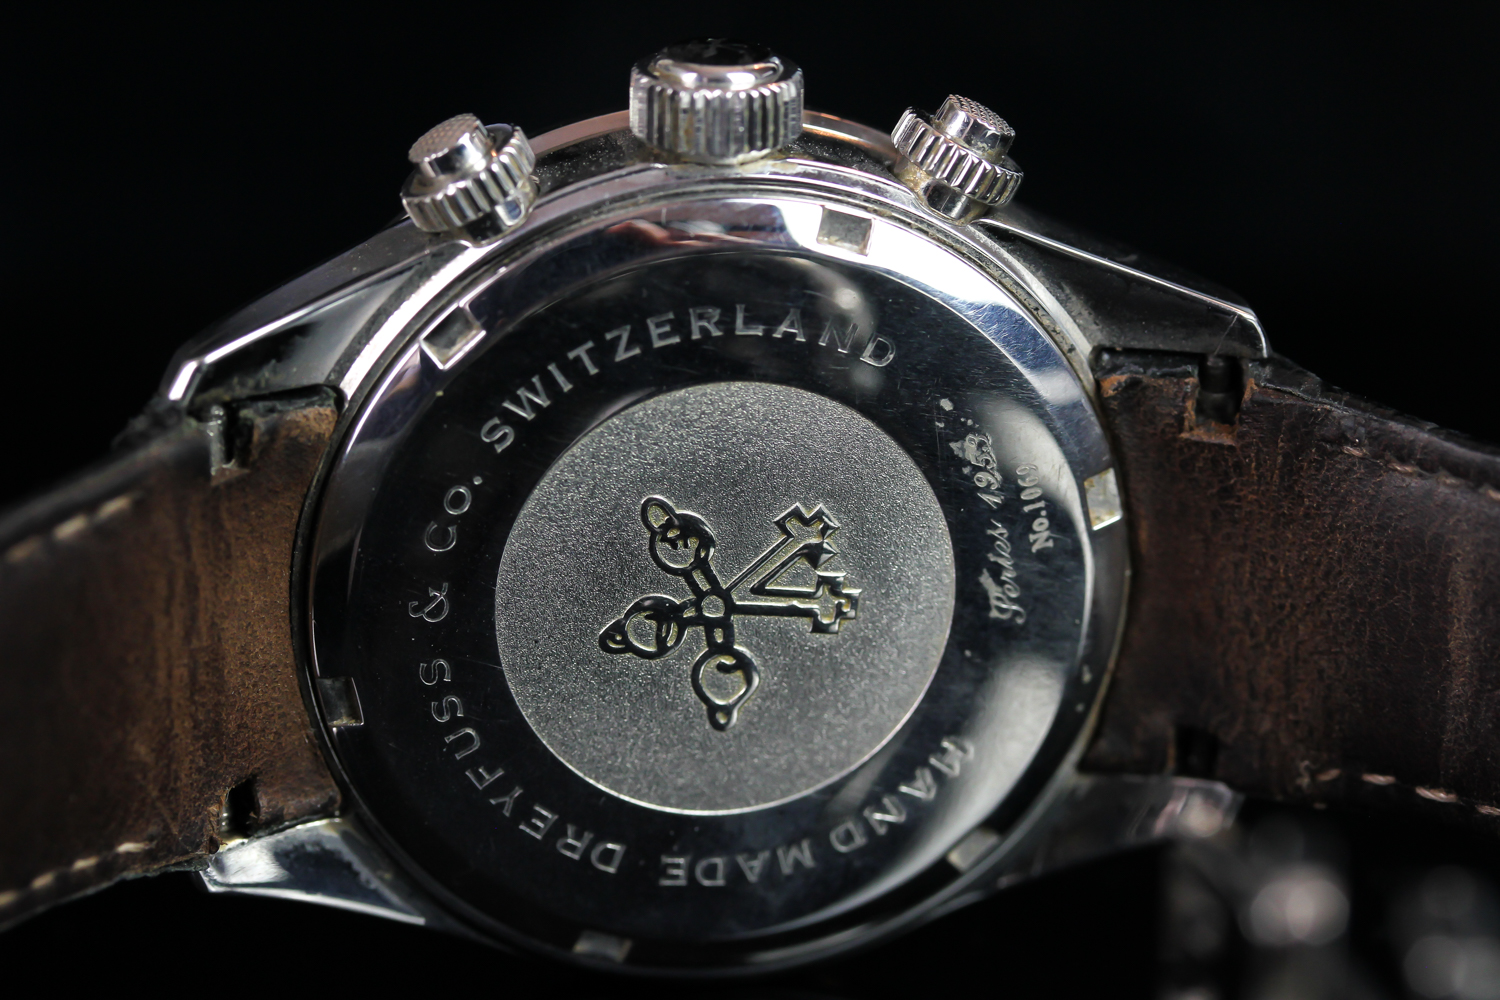 GENTLMANS DREYFUSS AND CO CHRONOGRAPH NO 1069, round, black dial with silver hands, silver baton - Image 4 of 4